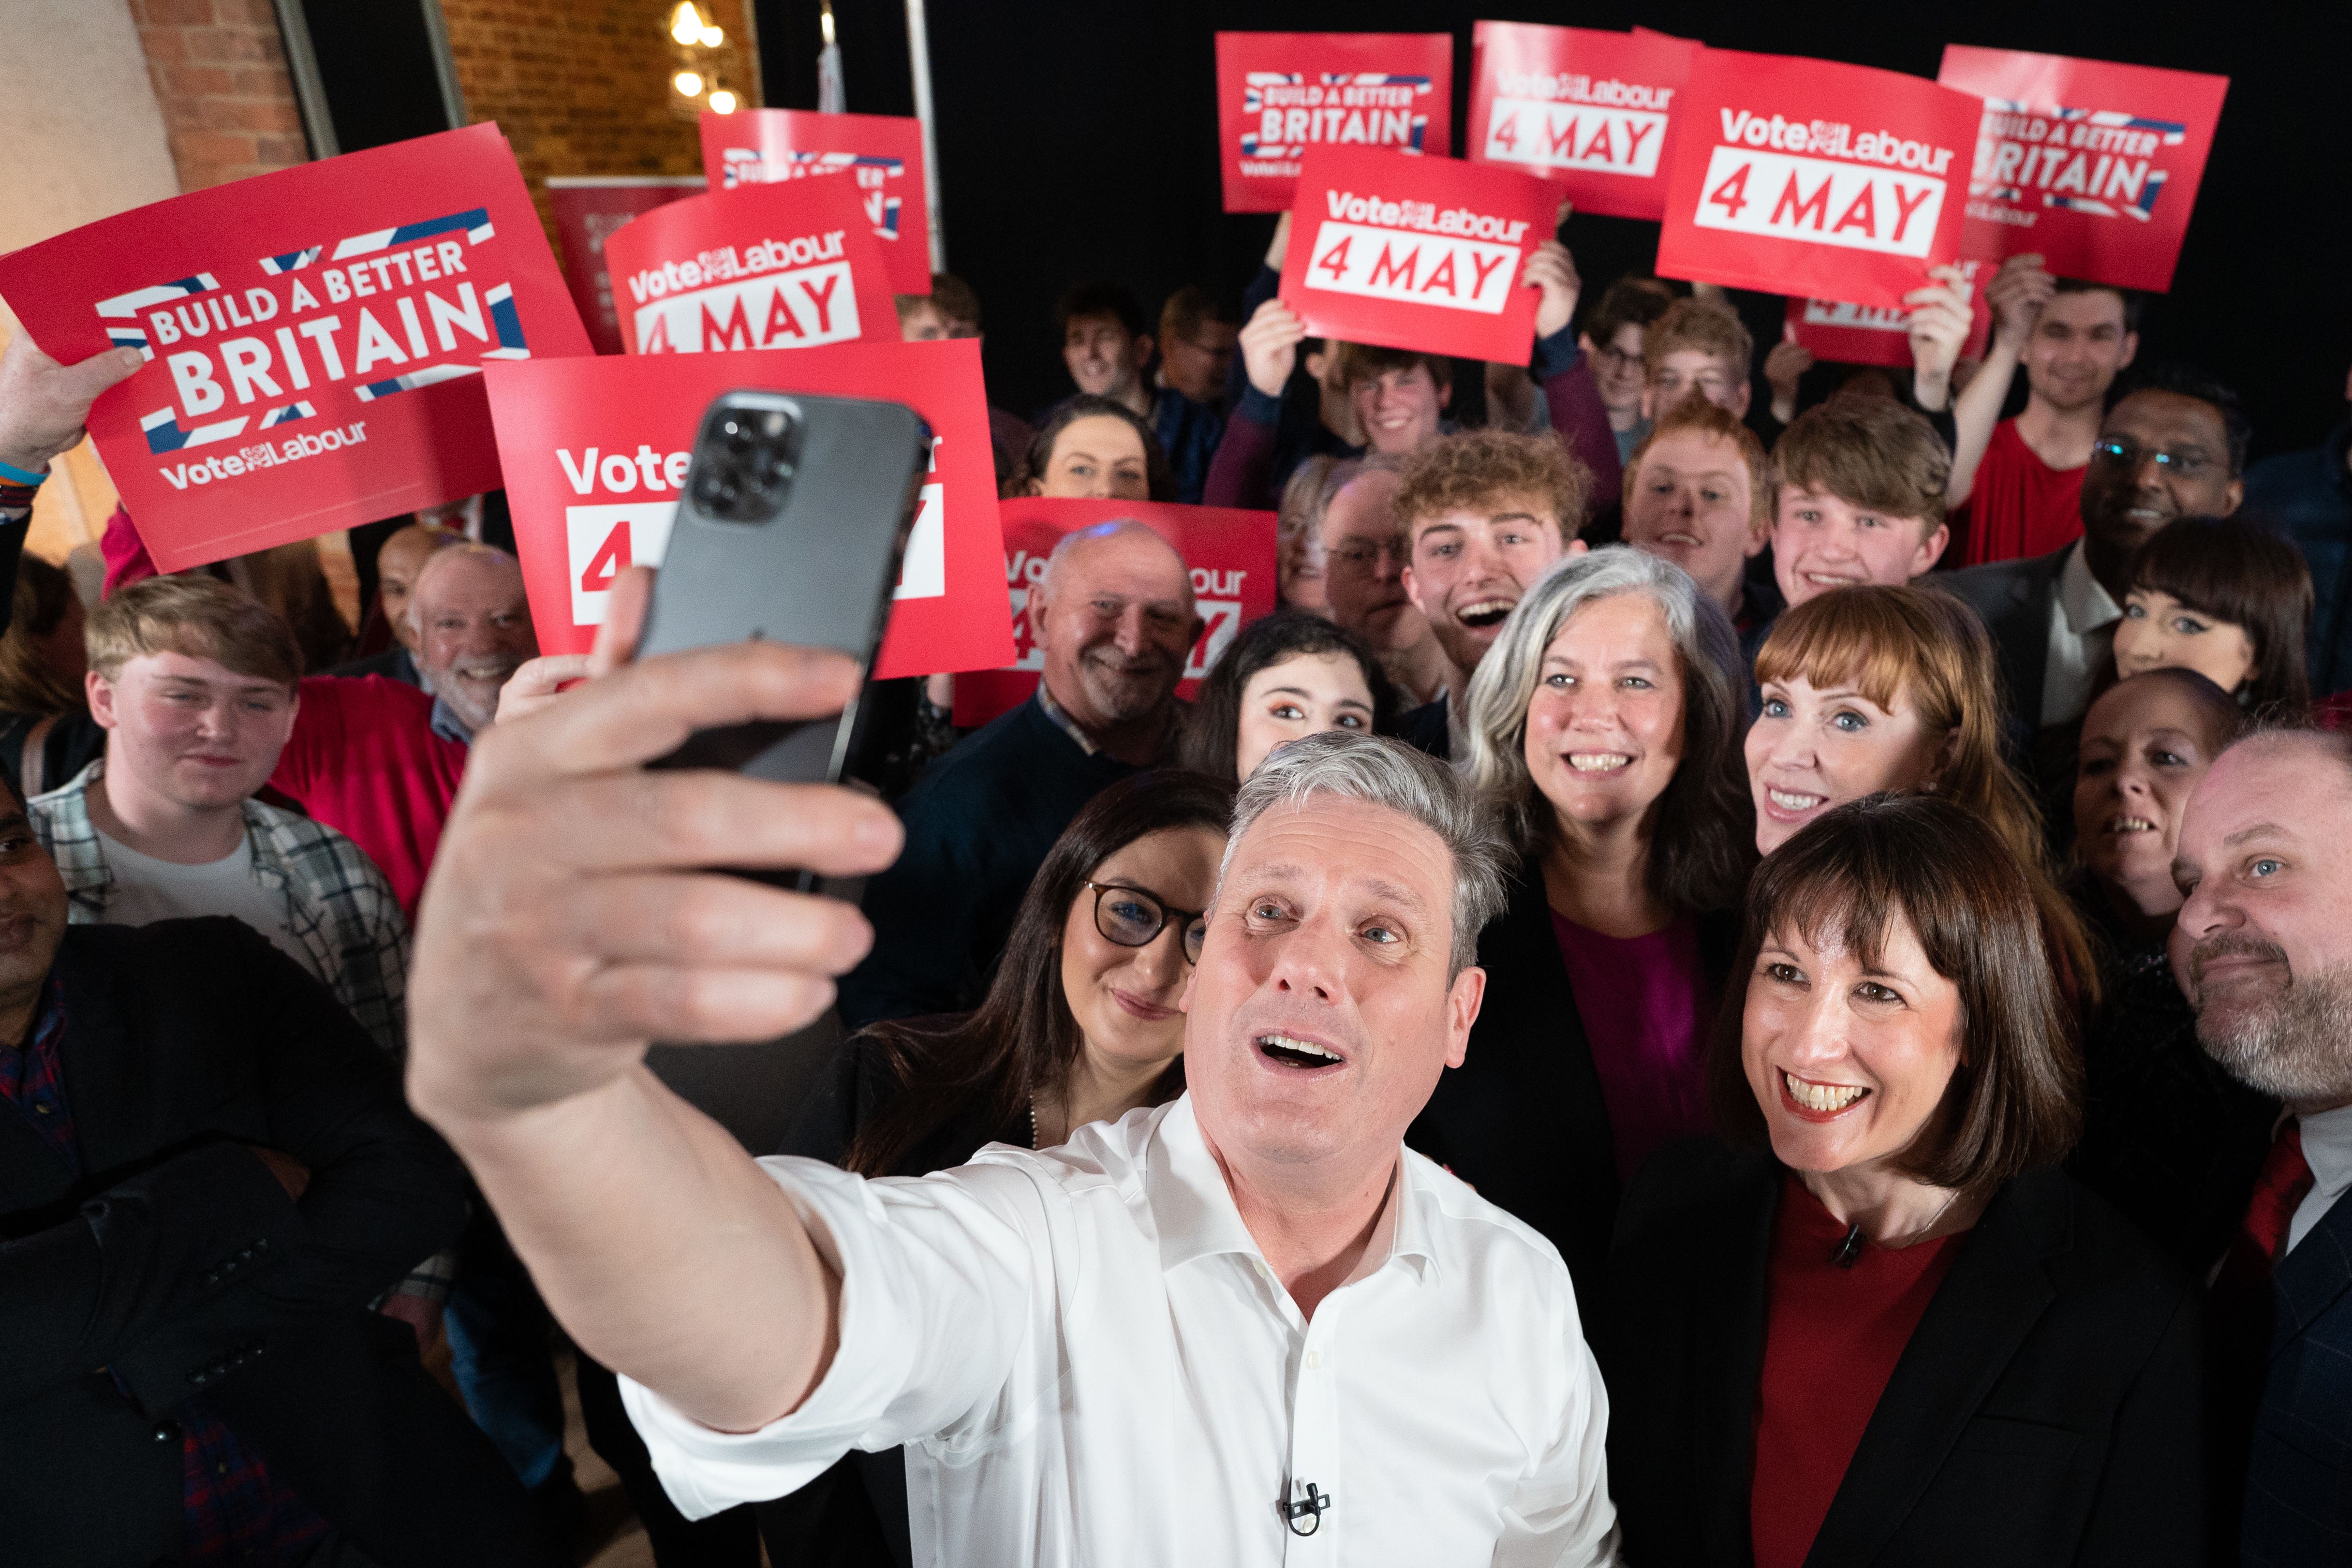 Keir Starmer at a Labour campaign event in Swindon